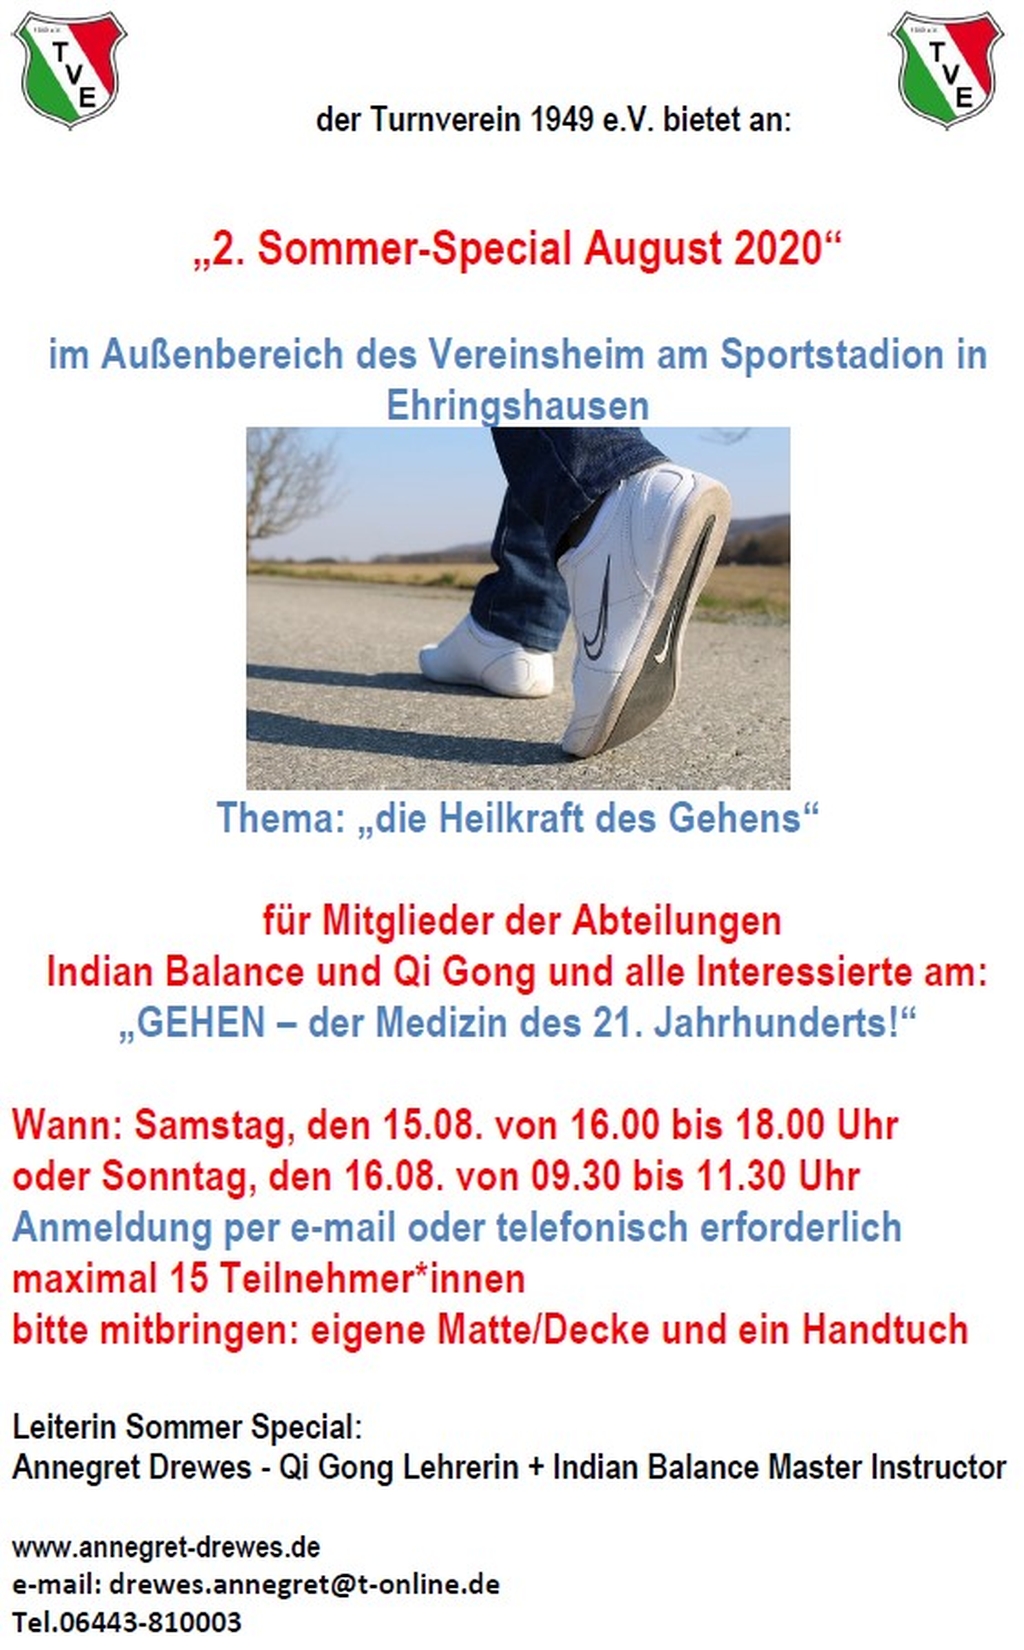 indianbalance+qigong sommerspecial0820